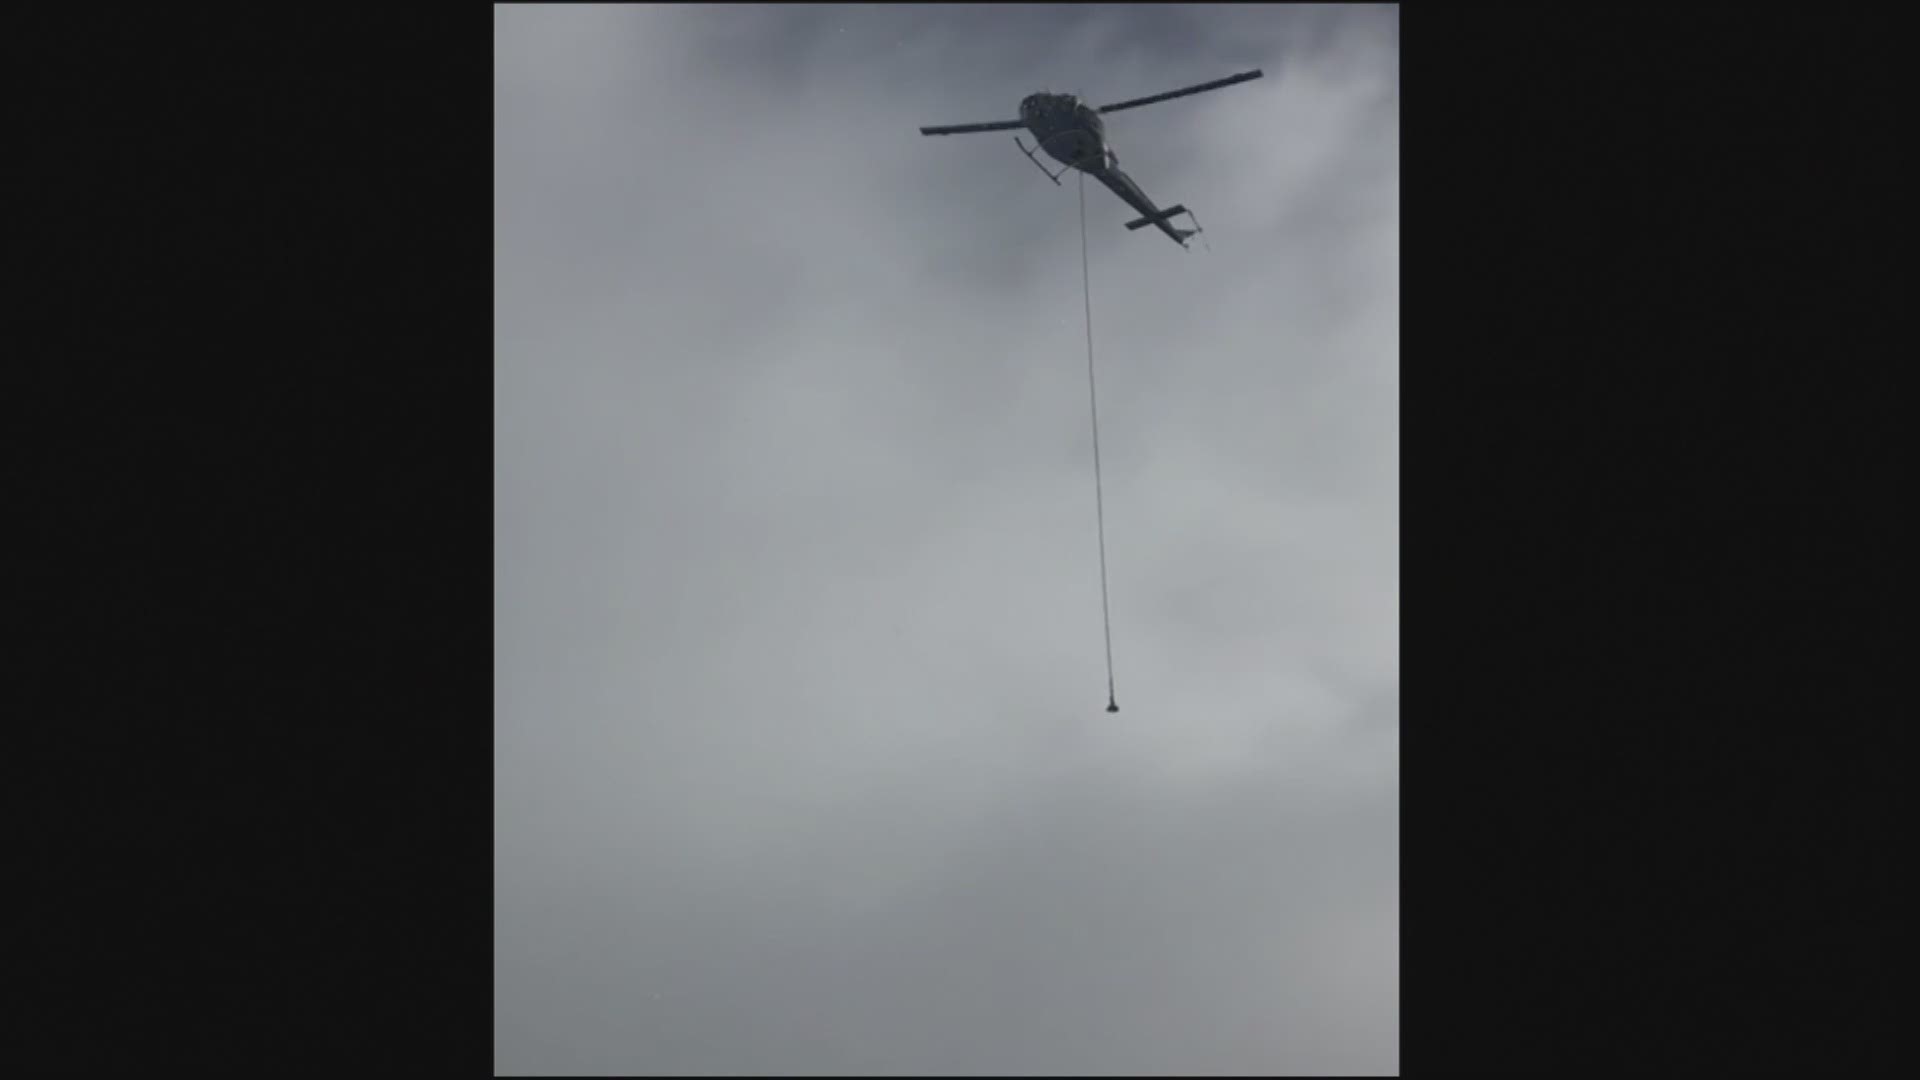 Amazing video shot by Ryan Miller shows a horse, which has been stranded on a remote Valley County mountain for weeks, being airlifted off of the mountain by a helicopter.